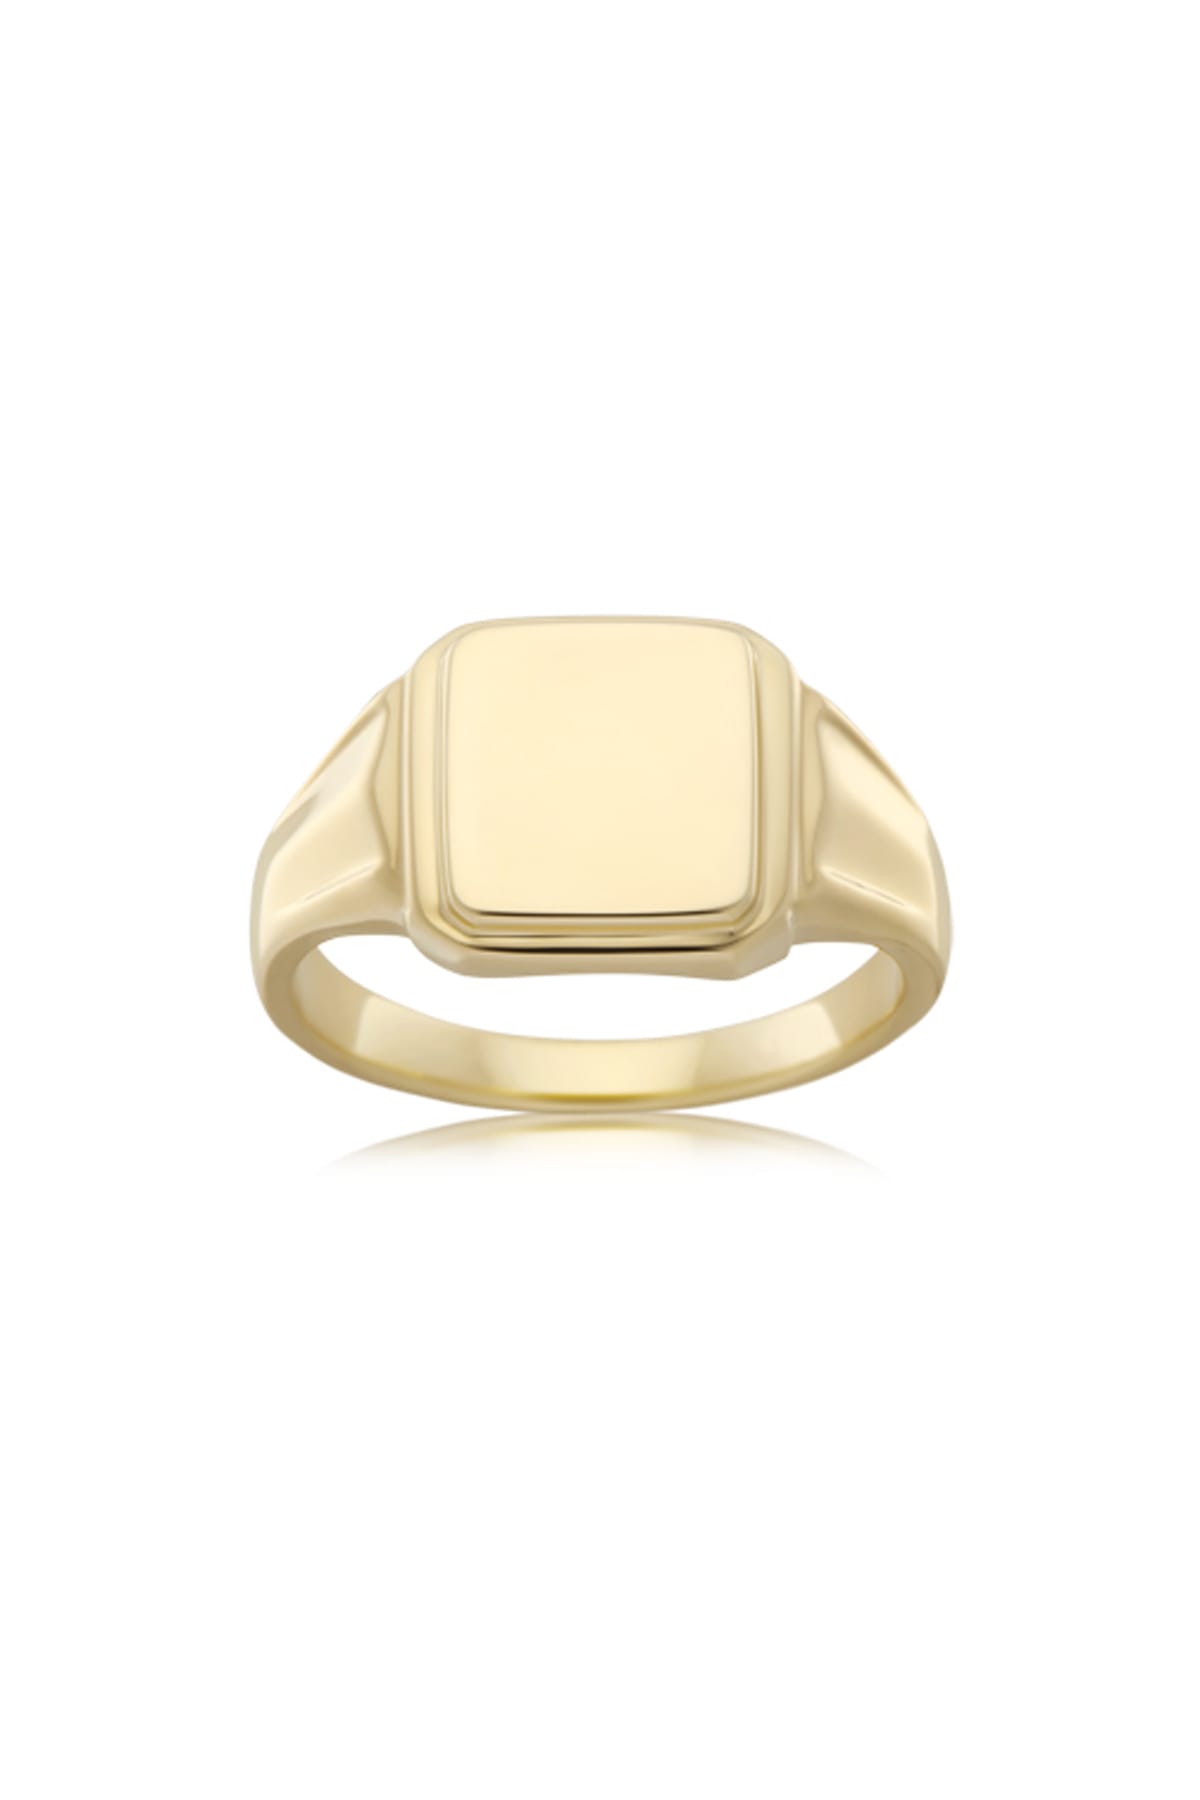 Solid Square Bevelled Flat Top Signet Ring available at LeGassick Diamonds and Jewellery Gold Coast, Australia.